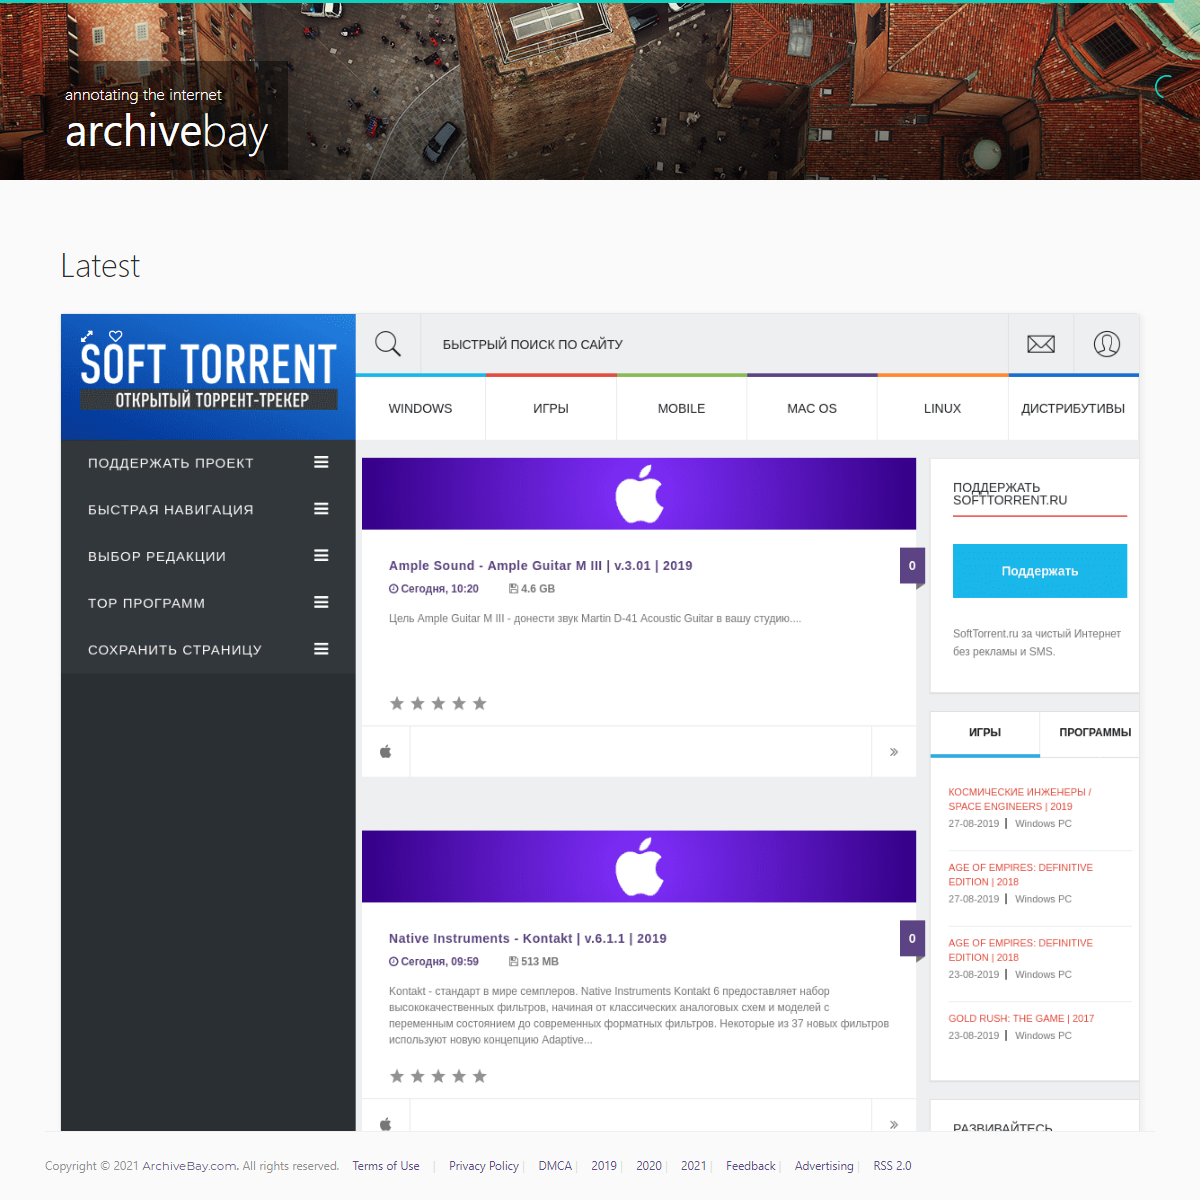 A complete backup of https://www.archivebay.com/site/softtorrent.ru--2019-09-07__10-07-23--120759